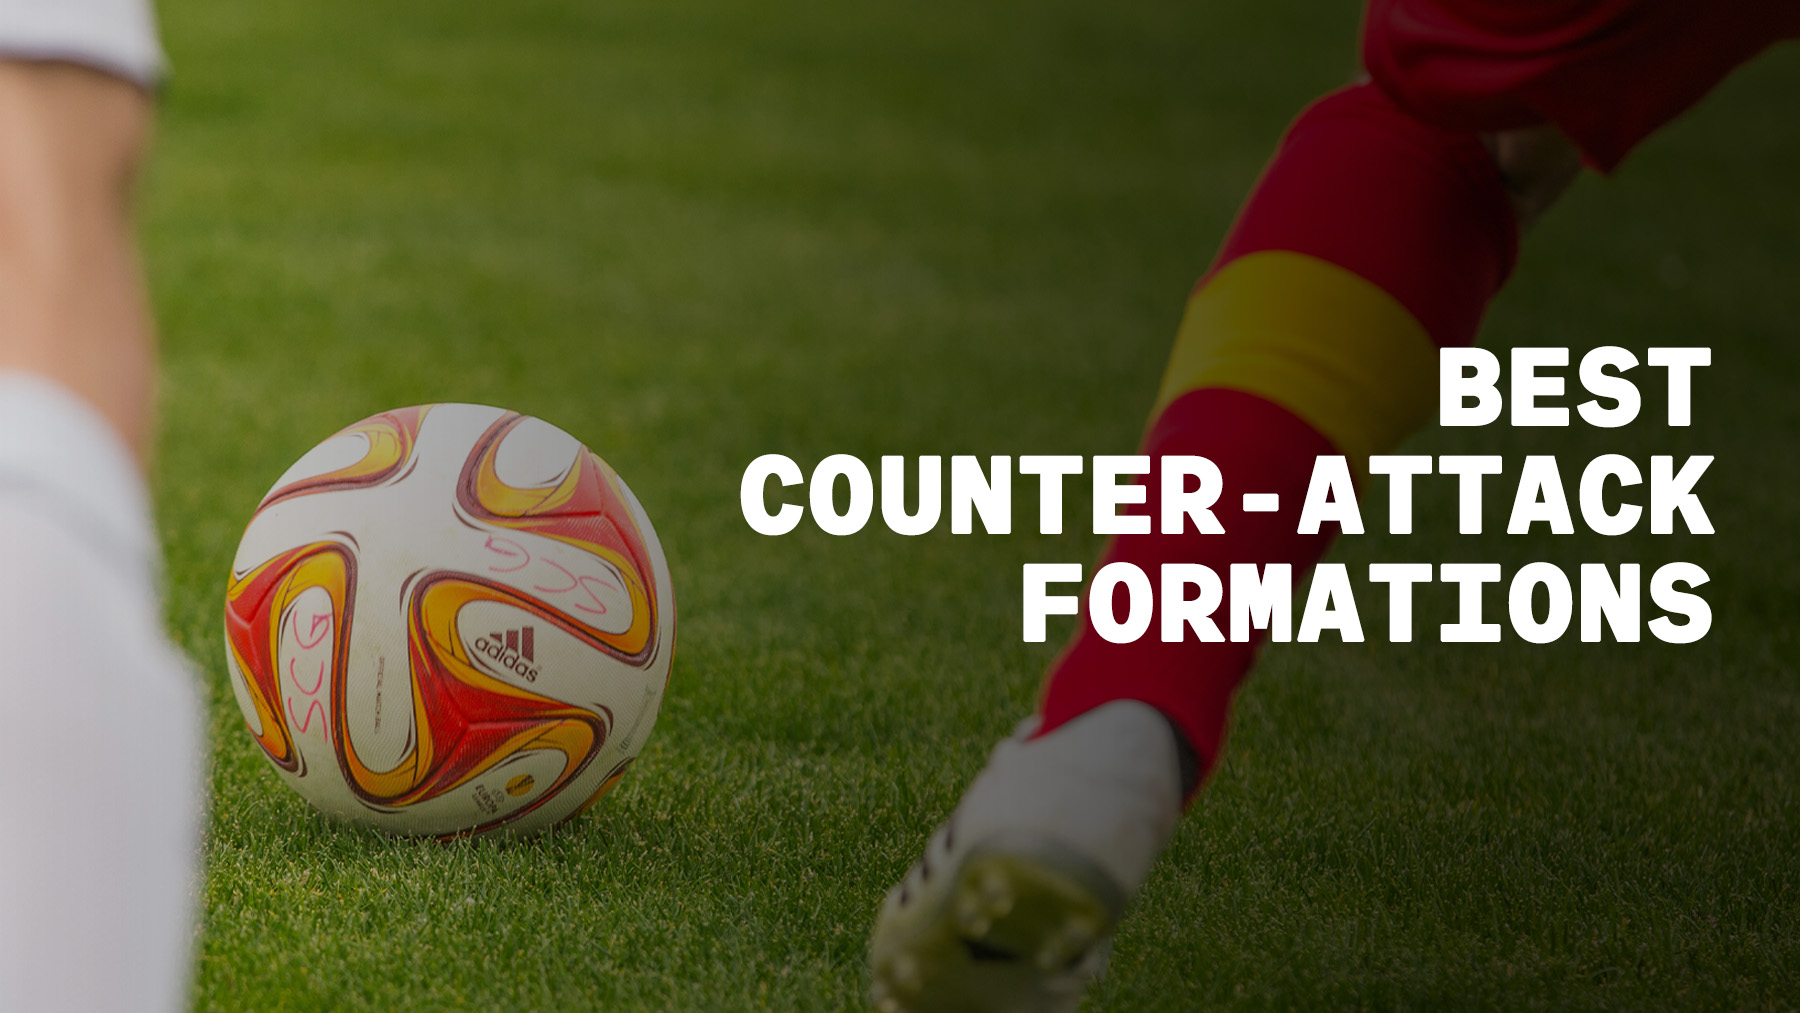 Choosing the Best Formation for Counter-Attacking Football.